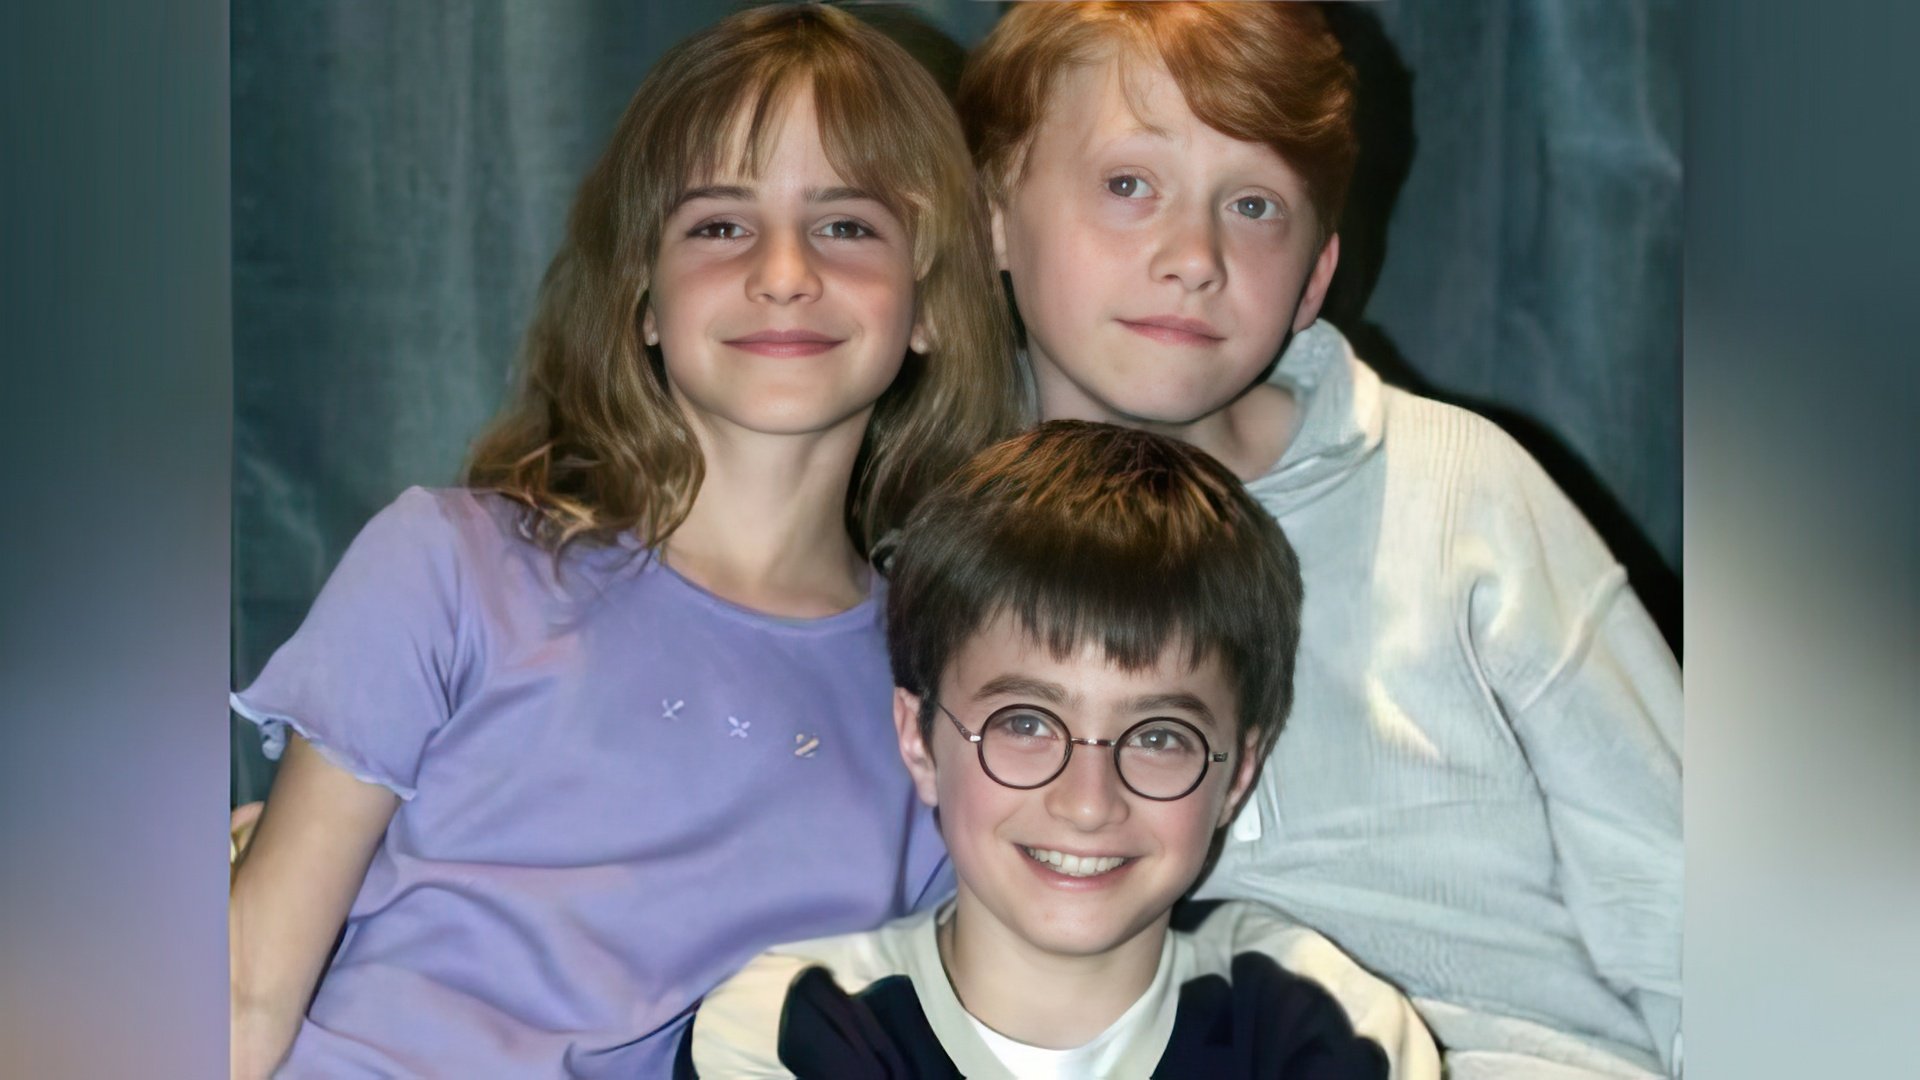 The trio of young wizards – Harry, Ron, and Hermione